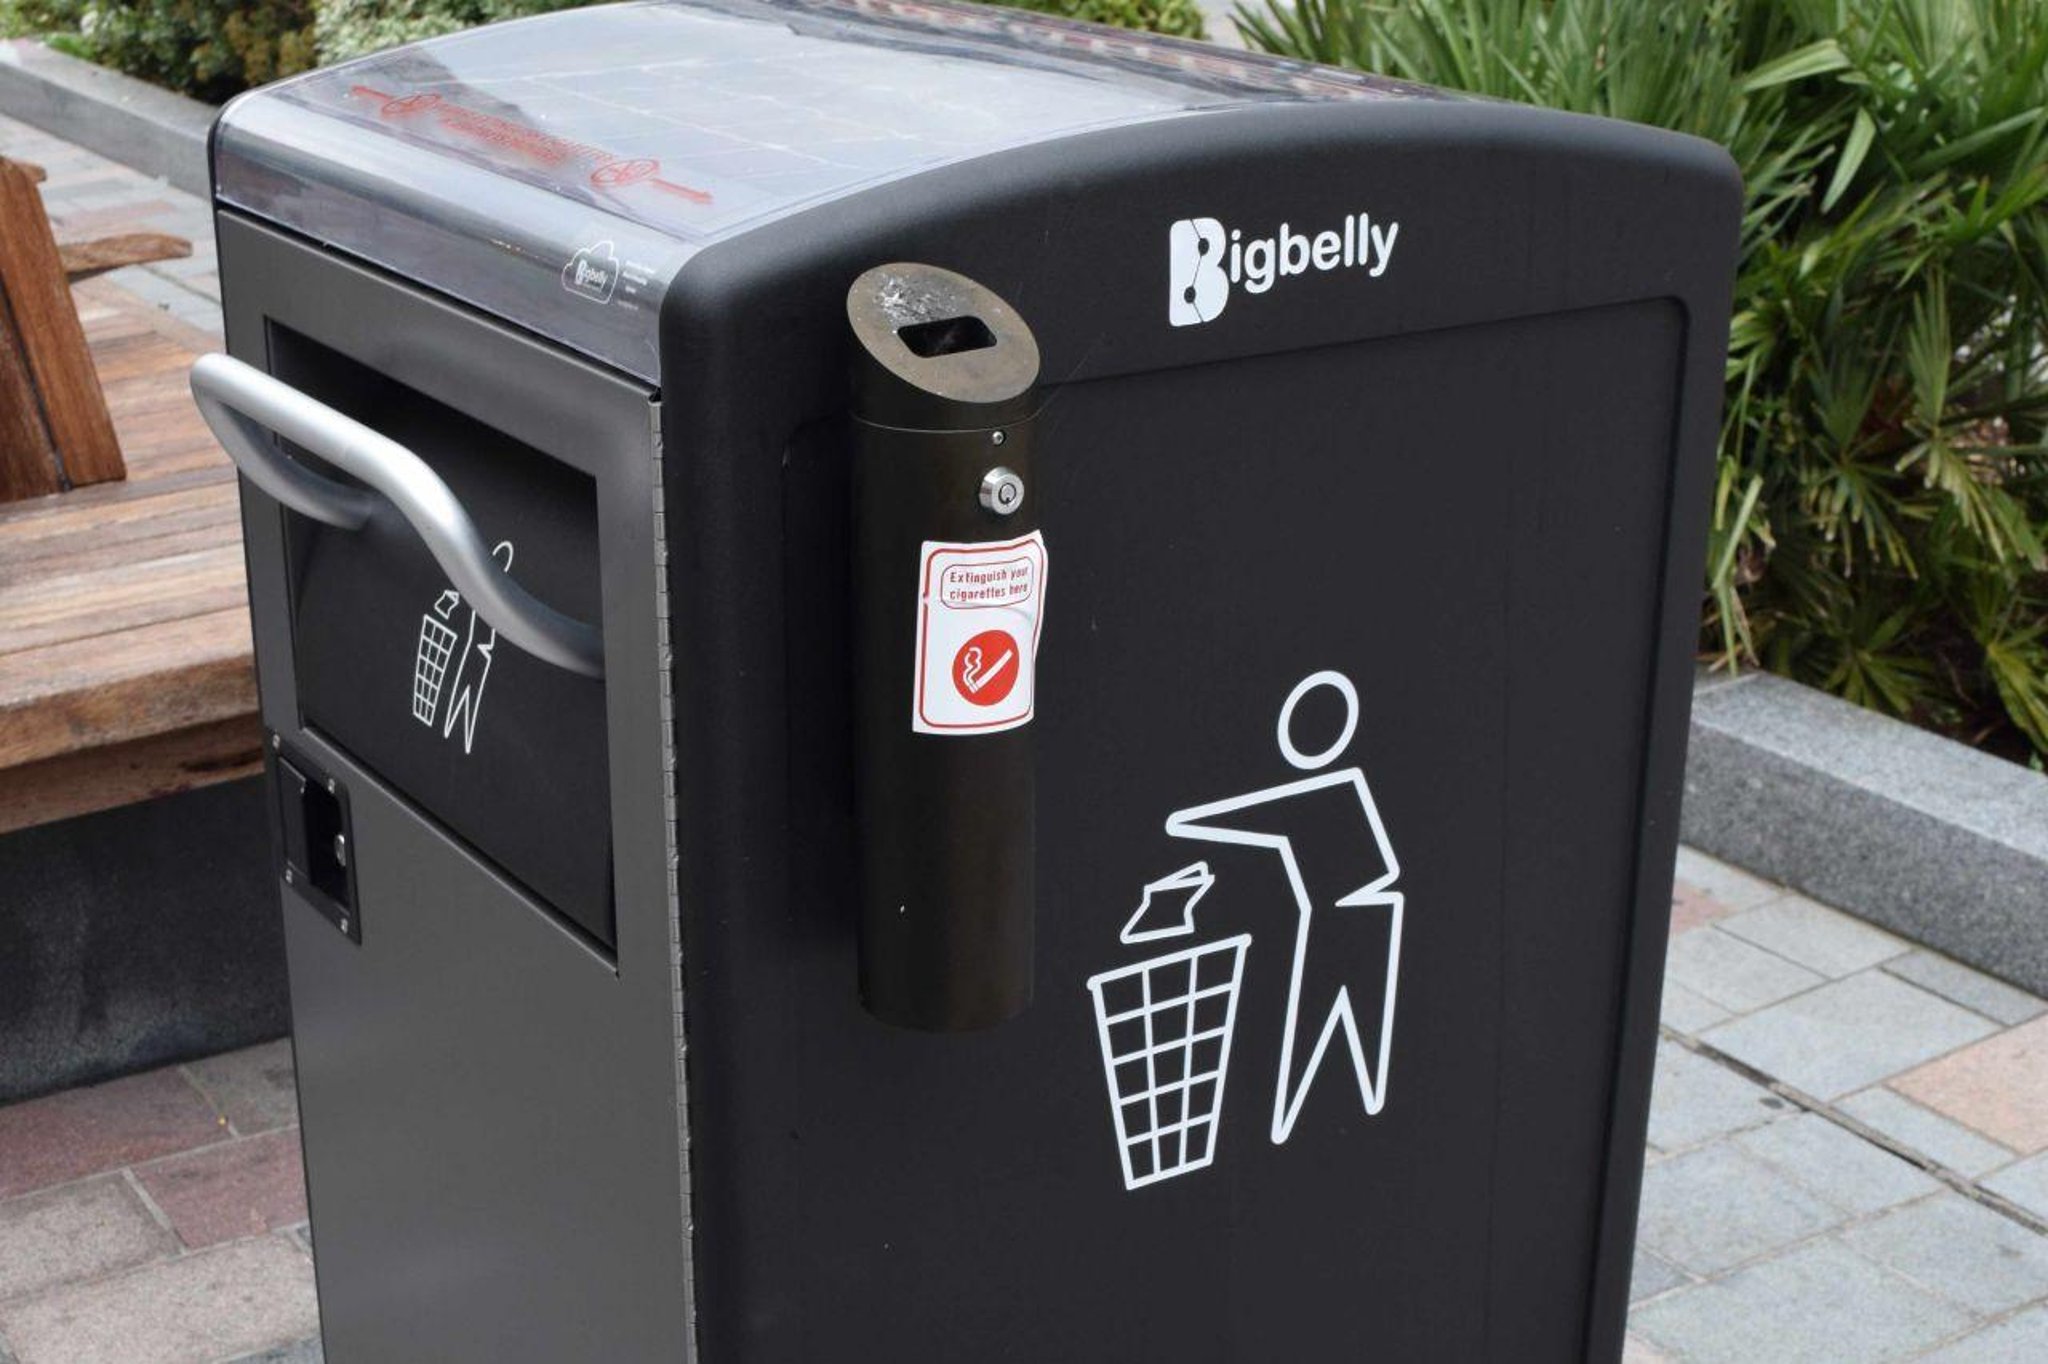 Bigbelly bins will gobble up rubbish in Linlithgow